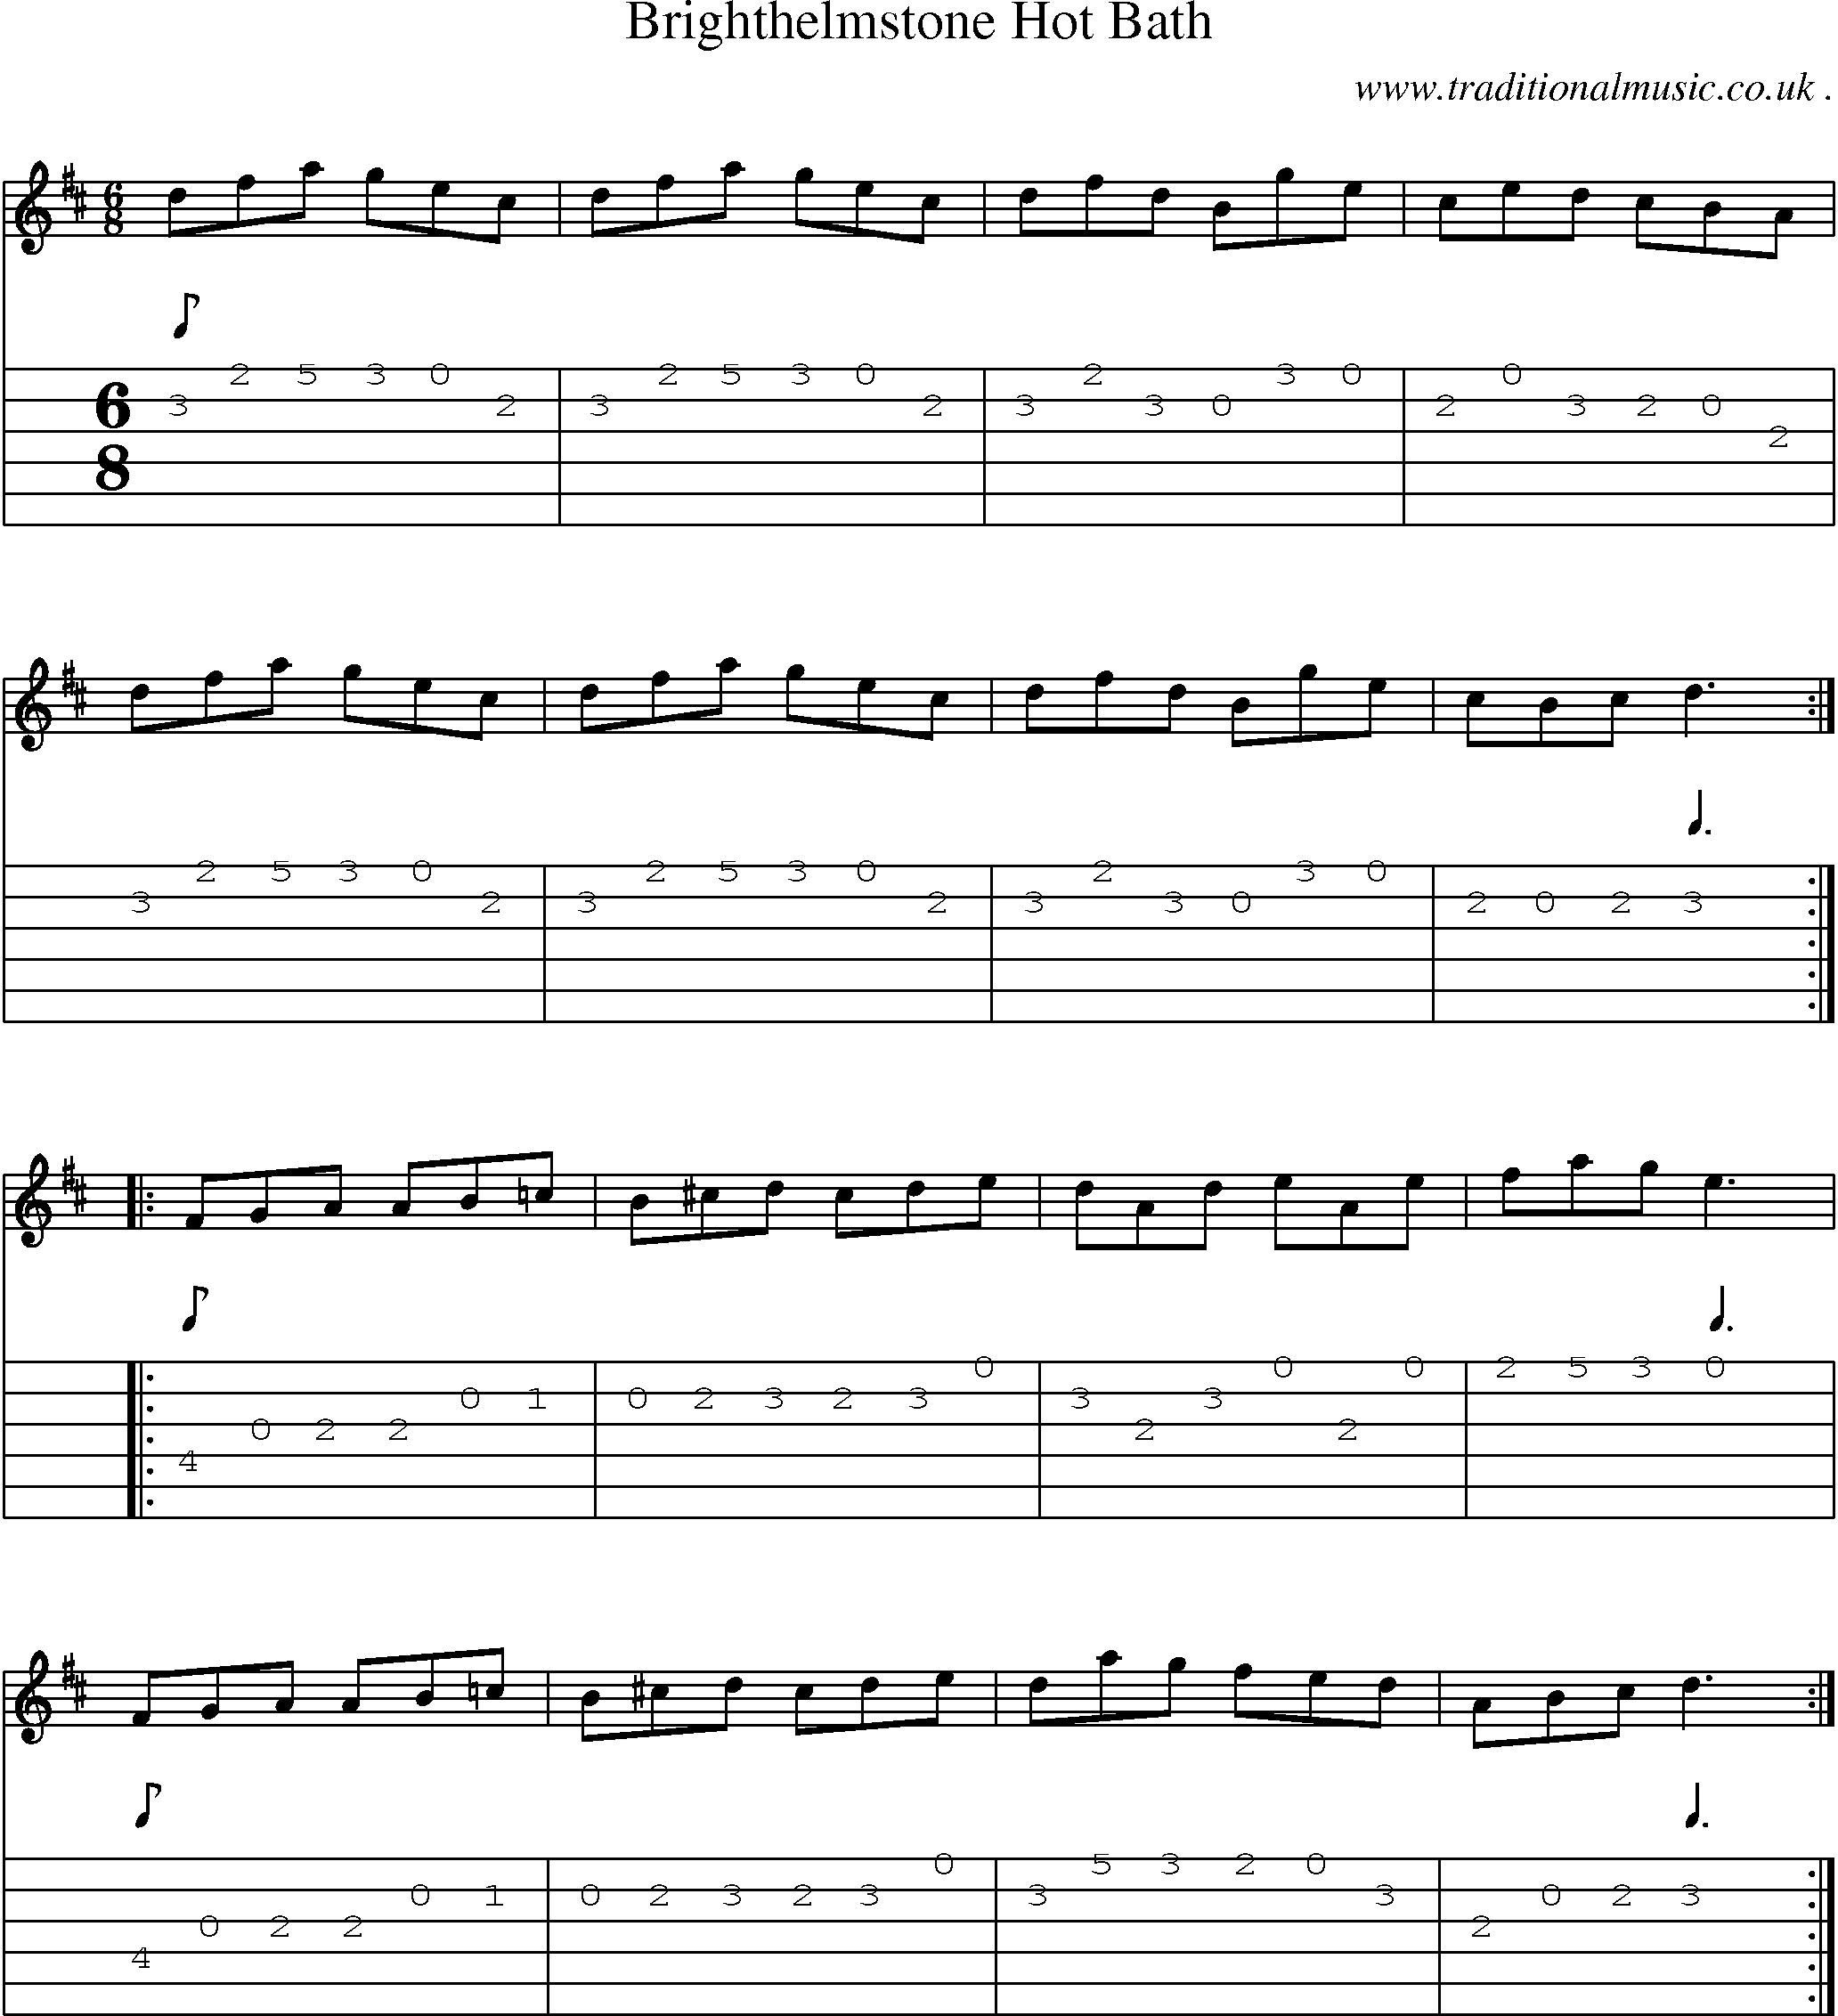 Sheet-Music and Guitar Tabs for Brighthelmstone Hot Bath